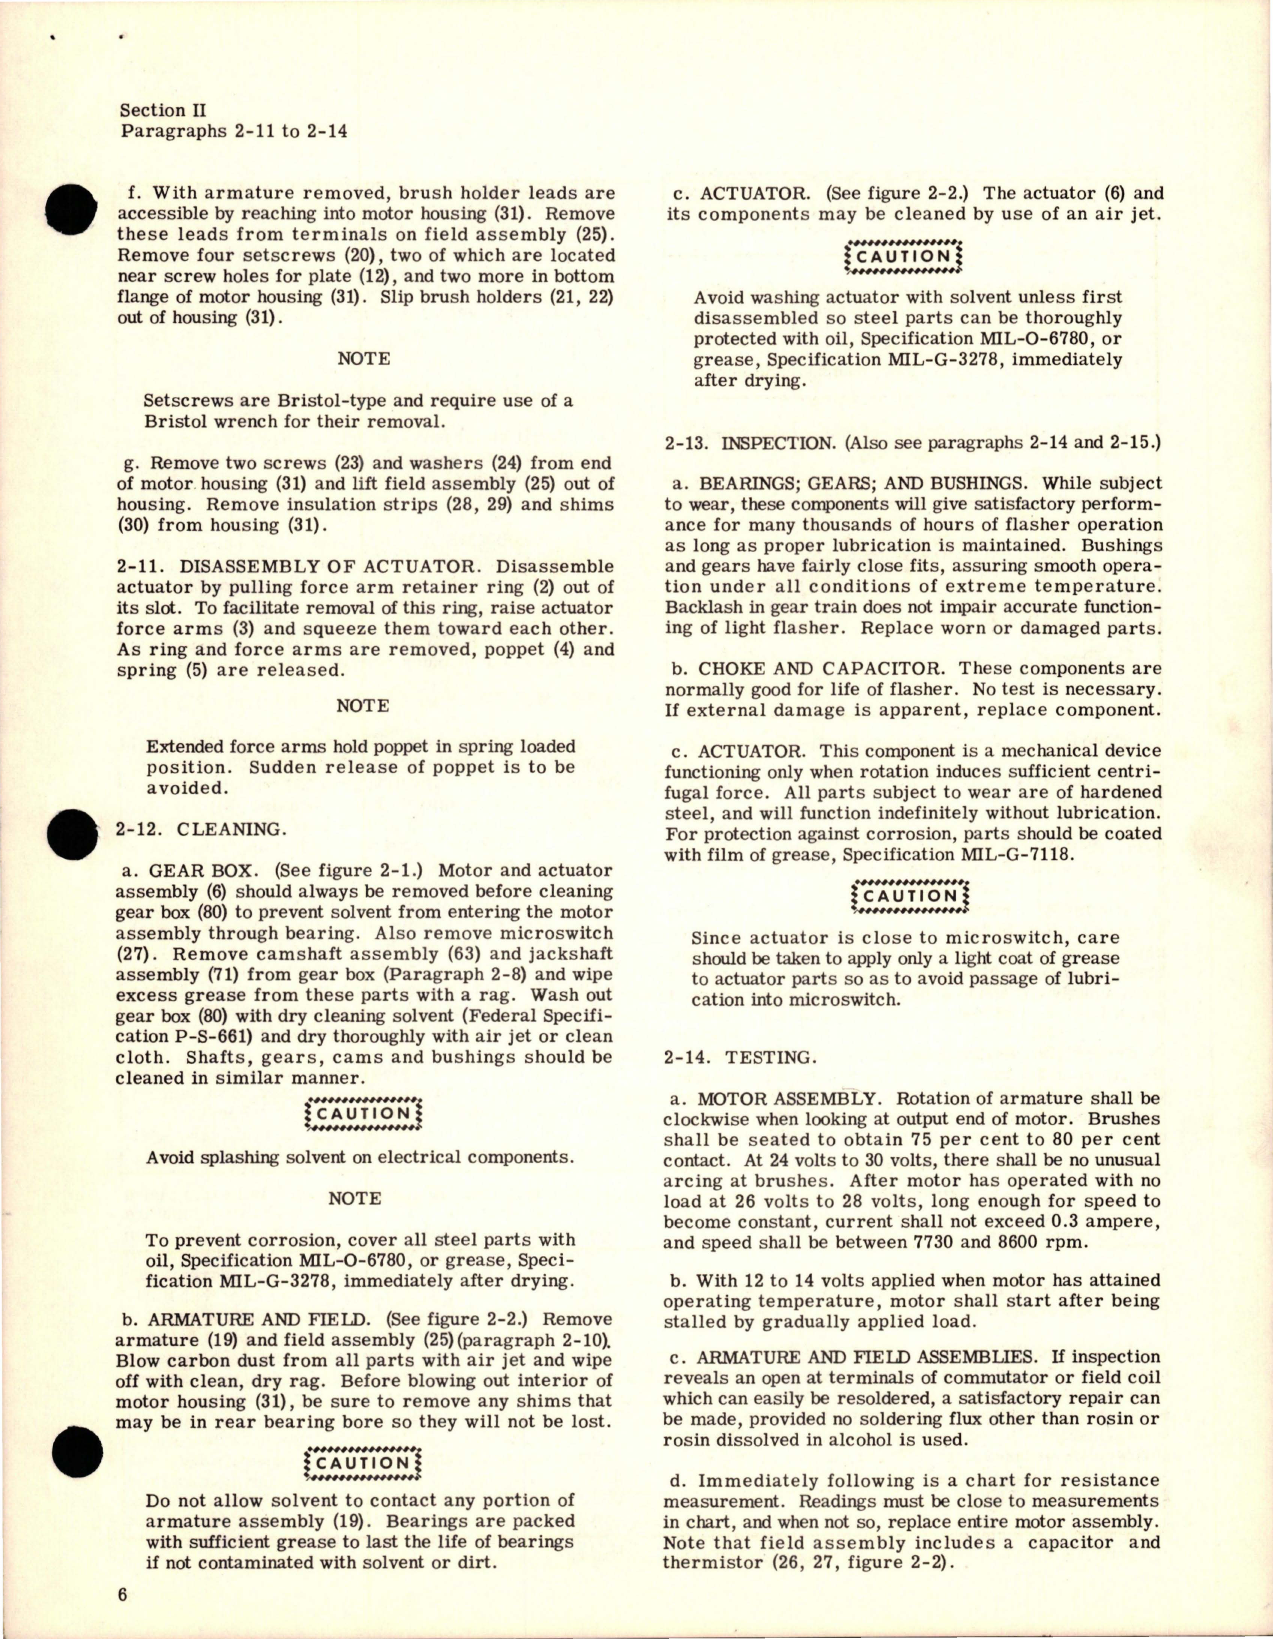 Sample page 7 from AirCorps Library document: Overhaul Instructions for Position Light Flashers 